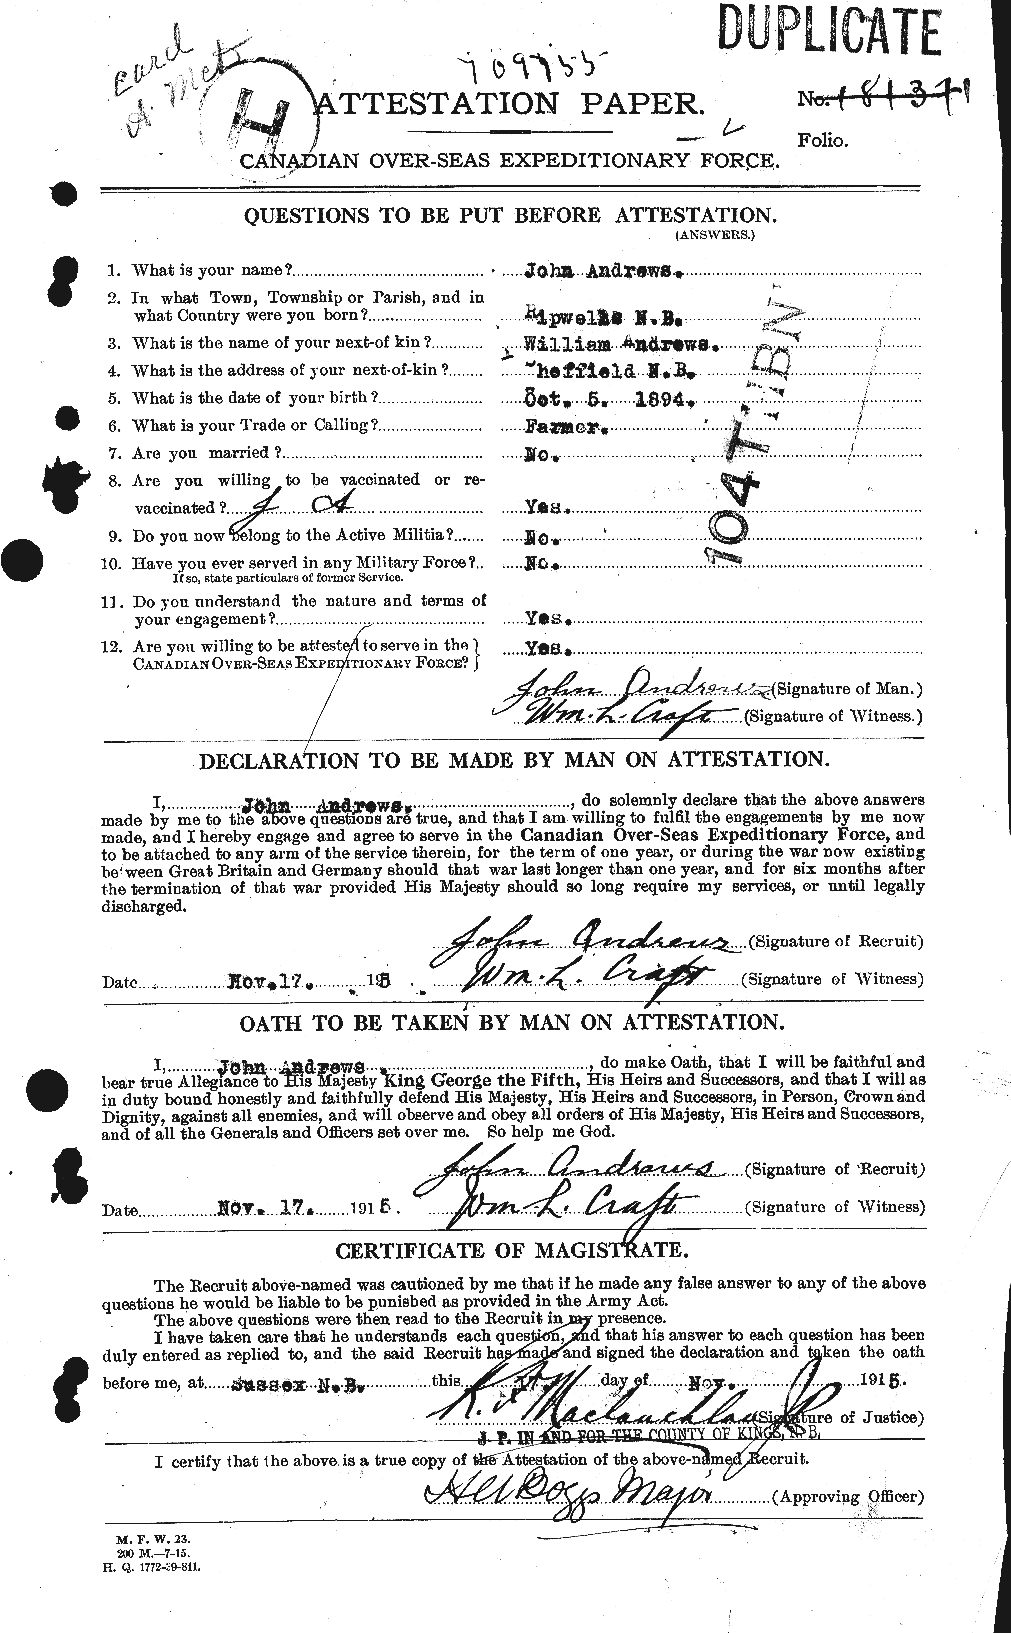 Personnel Records of the First World War - CEF 210211a